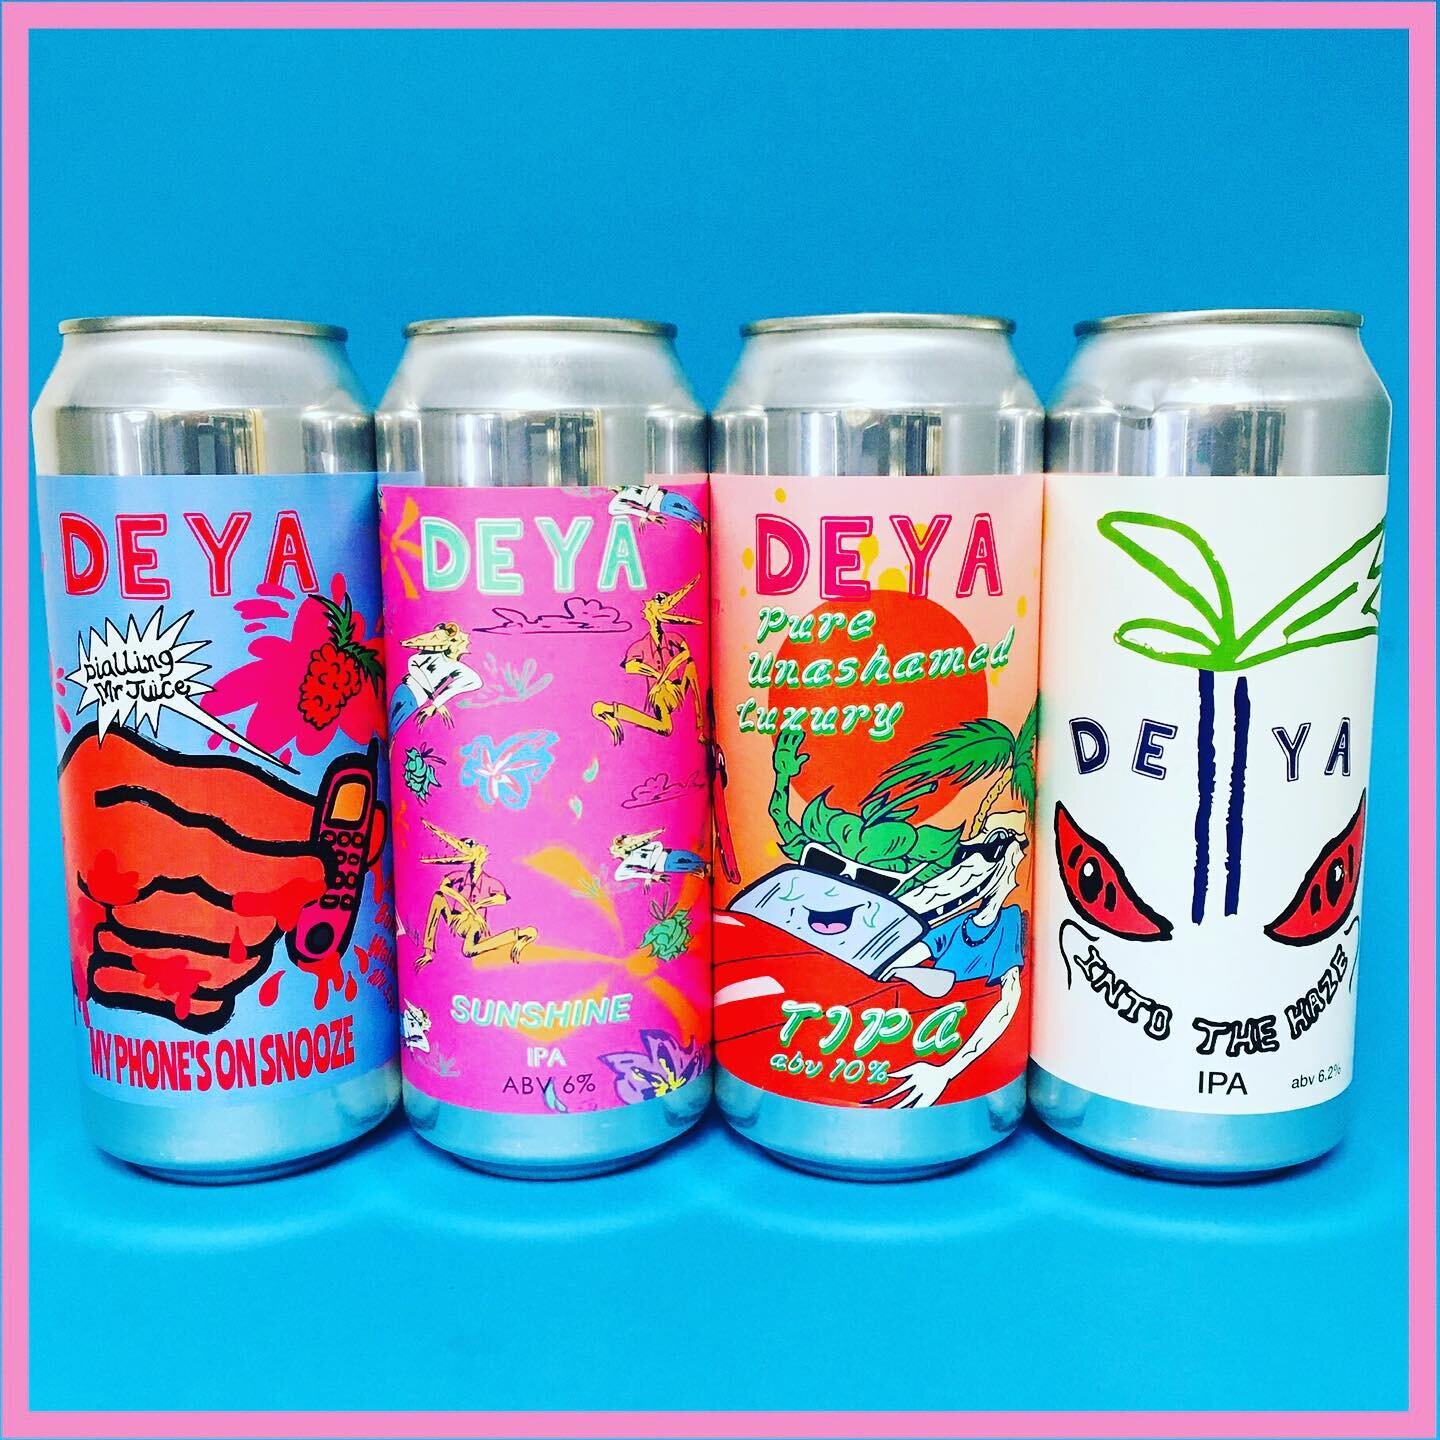 ☀️🌞🐊 Summery drop from @deyabrewery!! 🐊🌞☀️

Back in stock in can is their flagship IPA Into The Haze, and on keg coming soon is the amazing Steady Rolling Man. 

A couple of specials have landed featuring Pure Unashamed Luxury TIPA, Sunshine IPA 